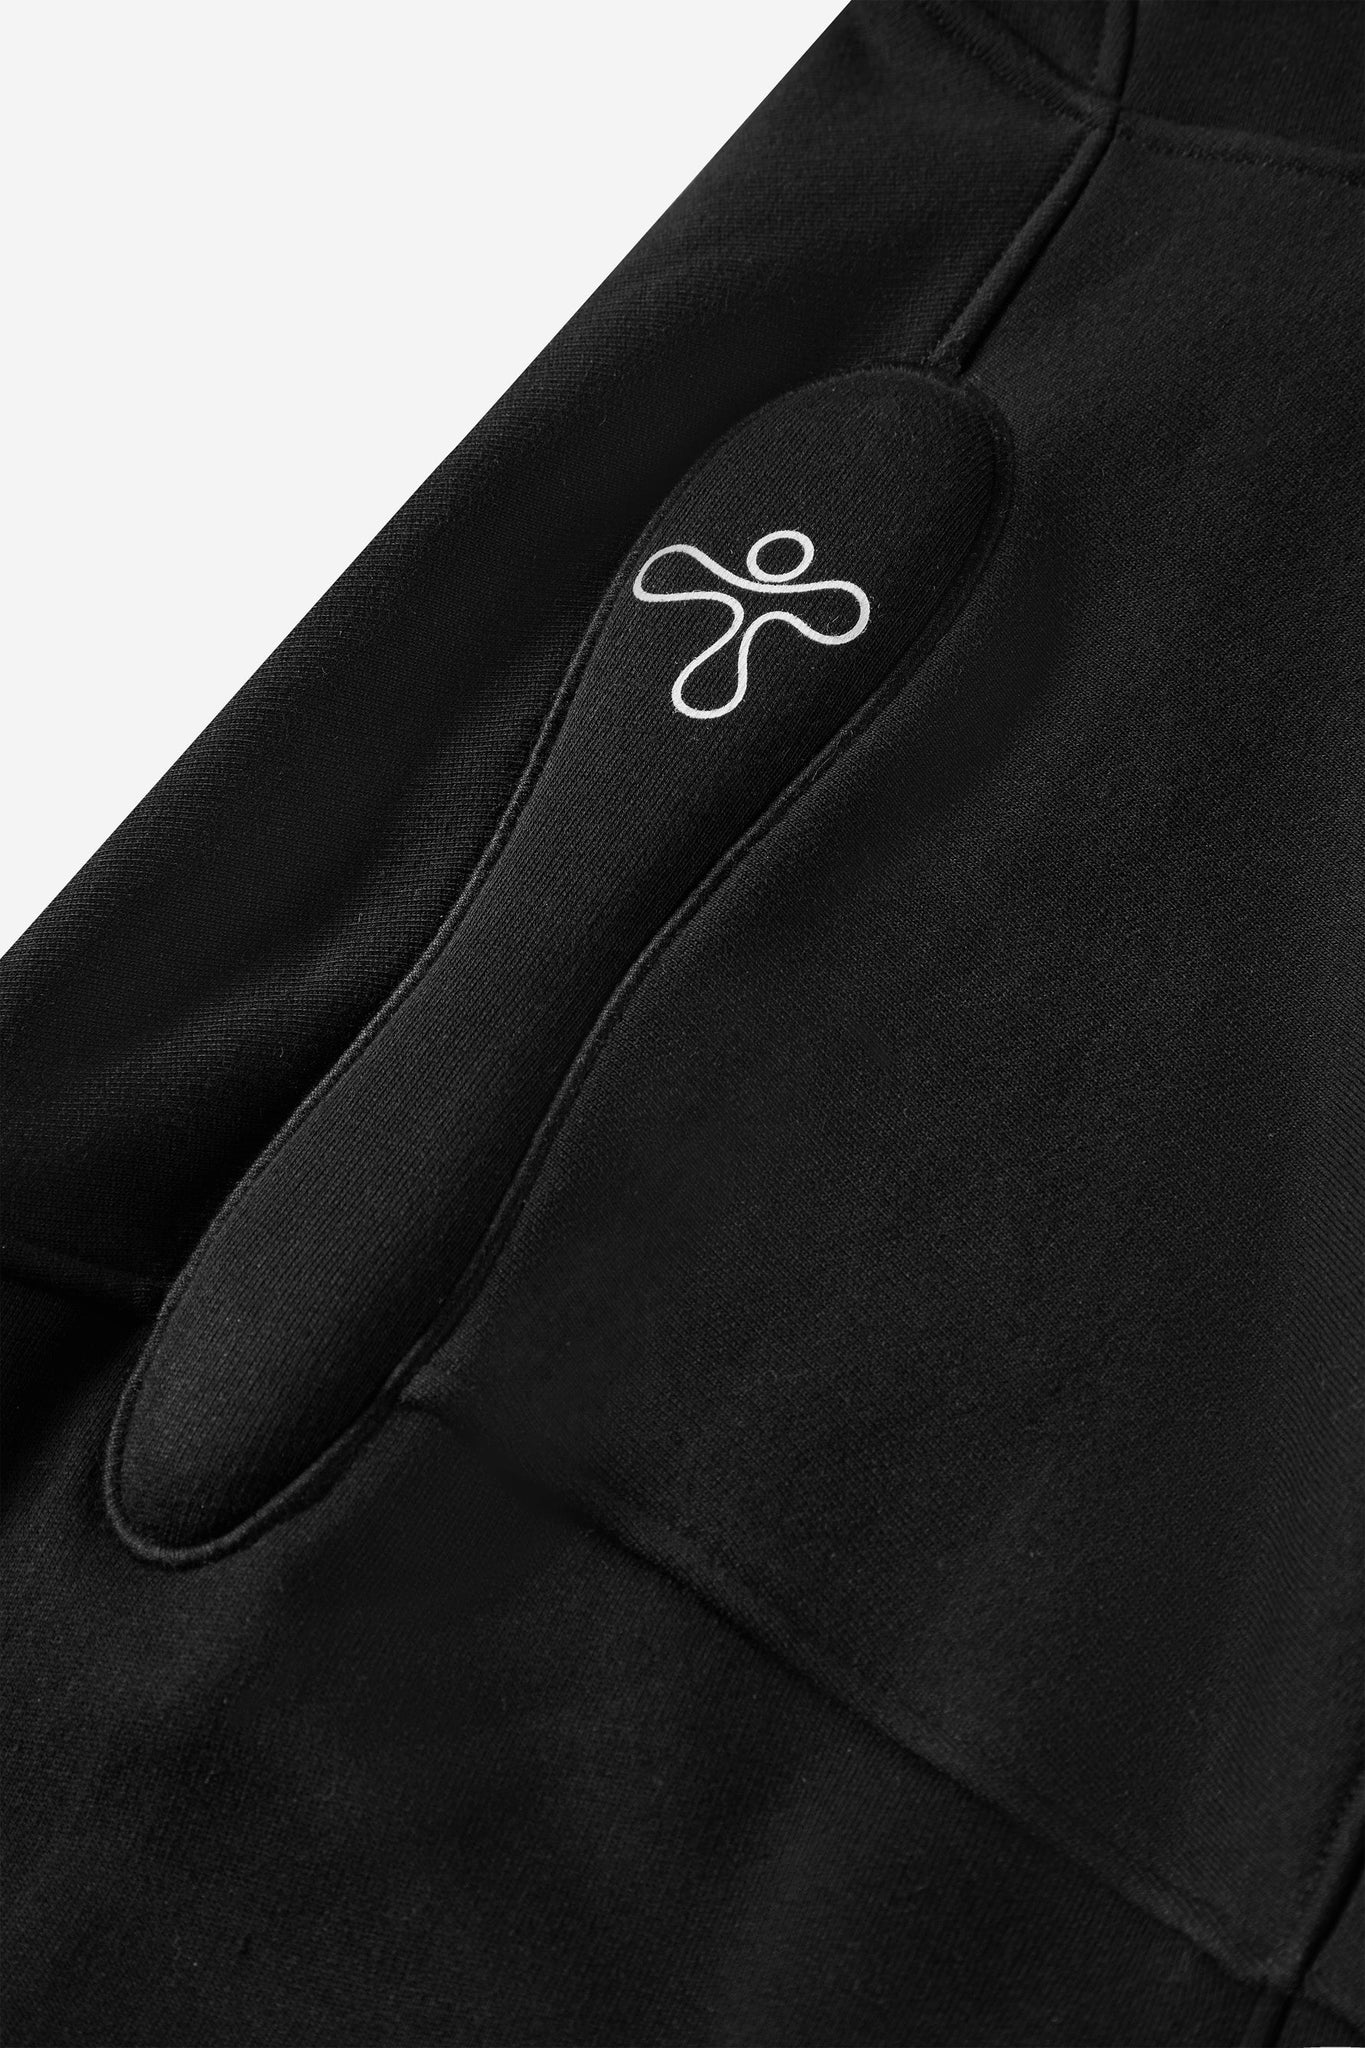 alt="detail of black hooded sweatshirt with shoulder padding embroidered detail and print"